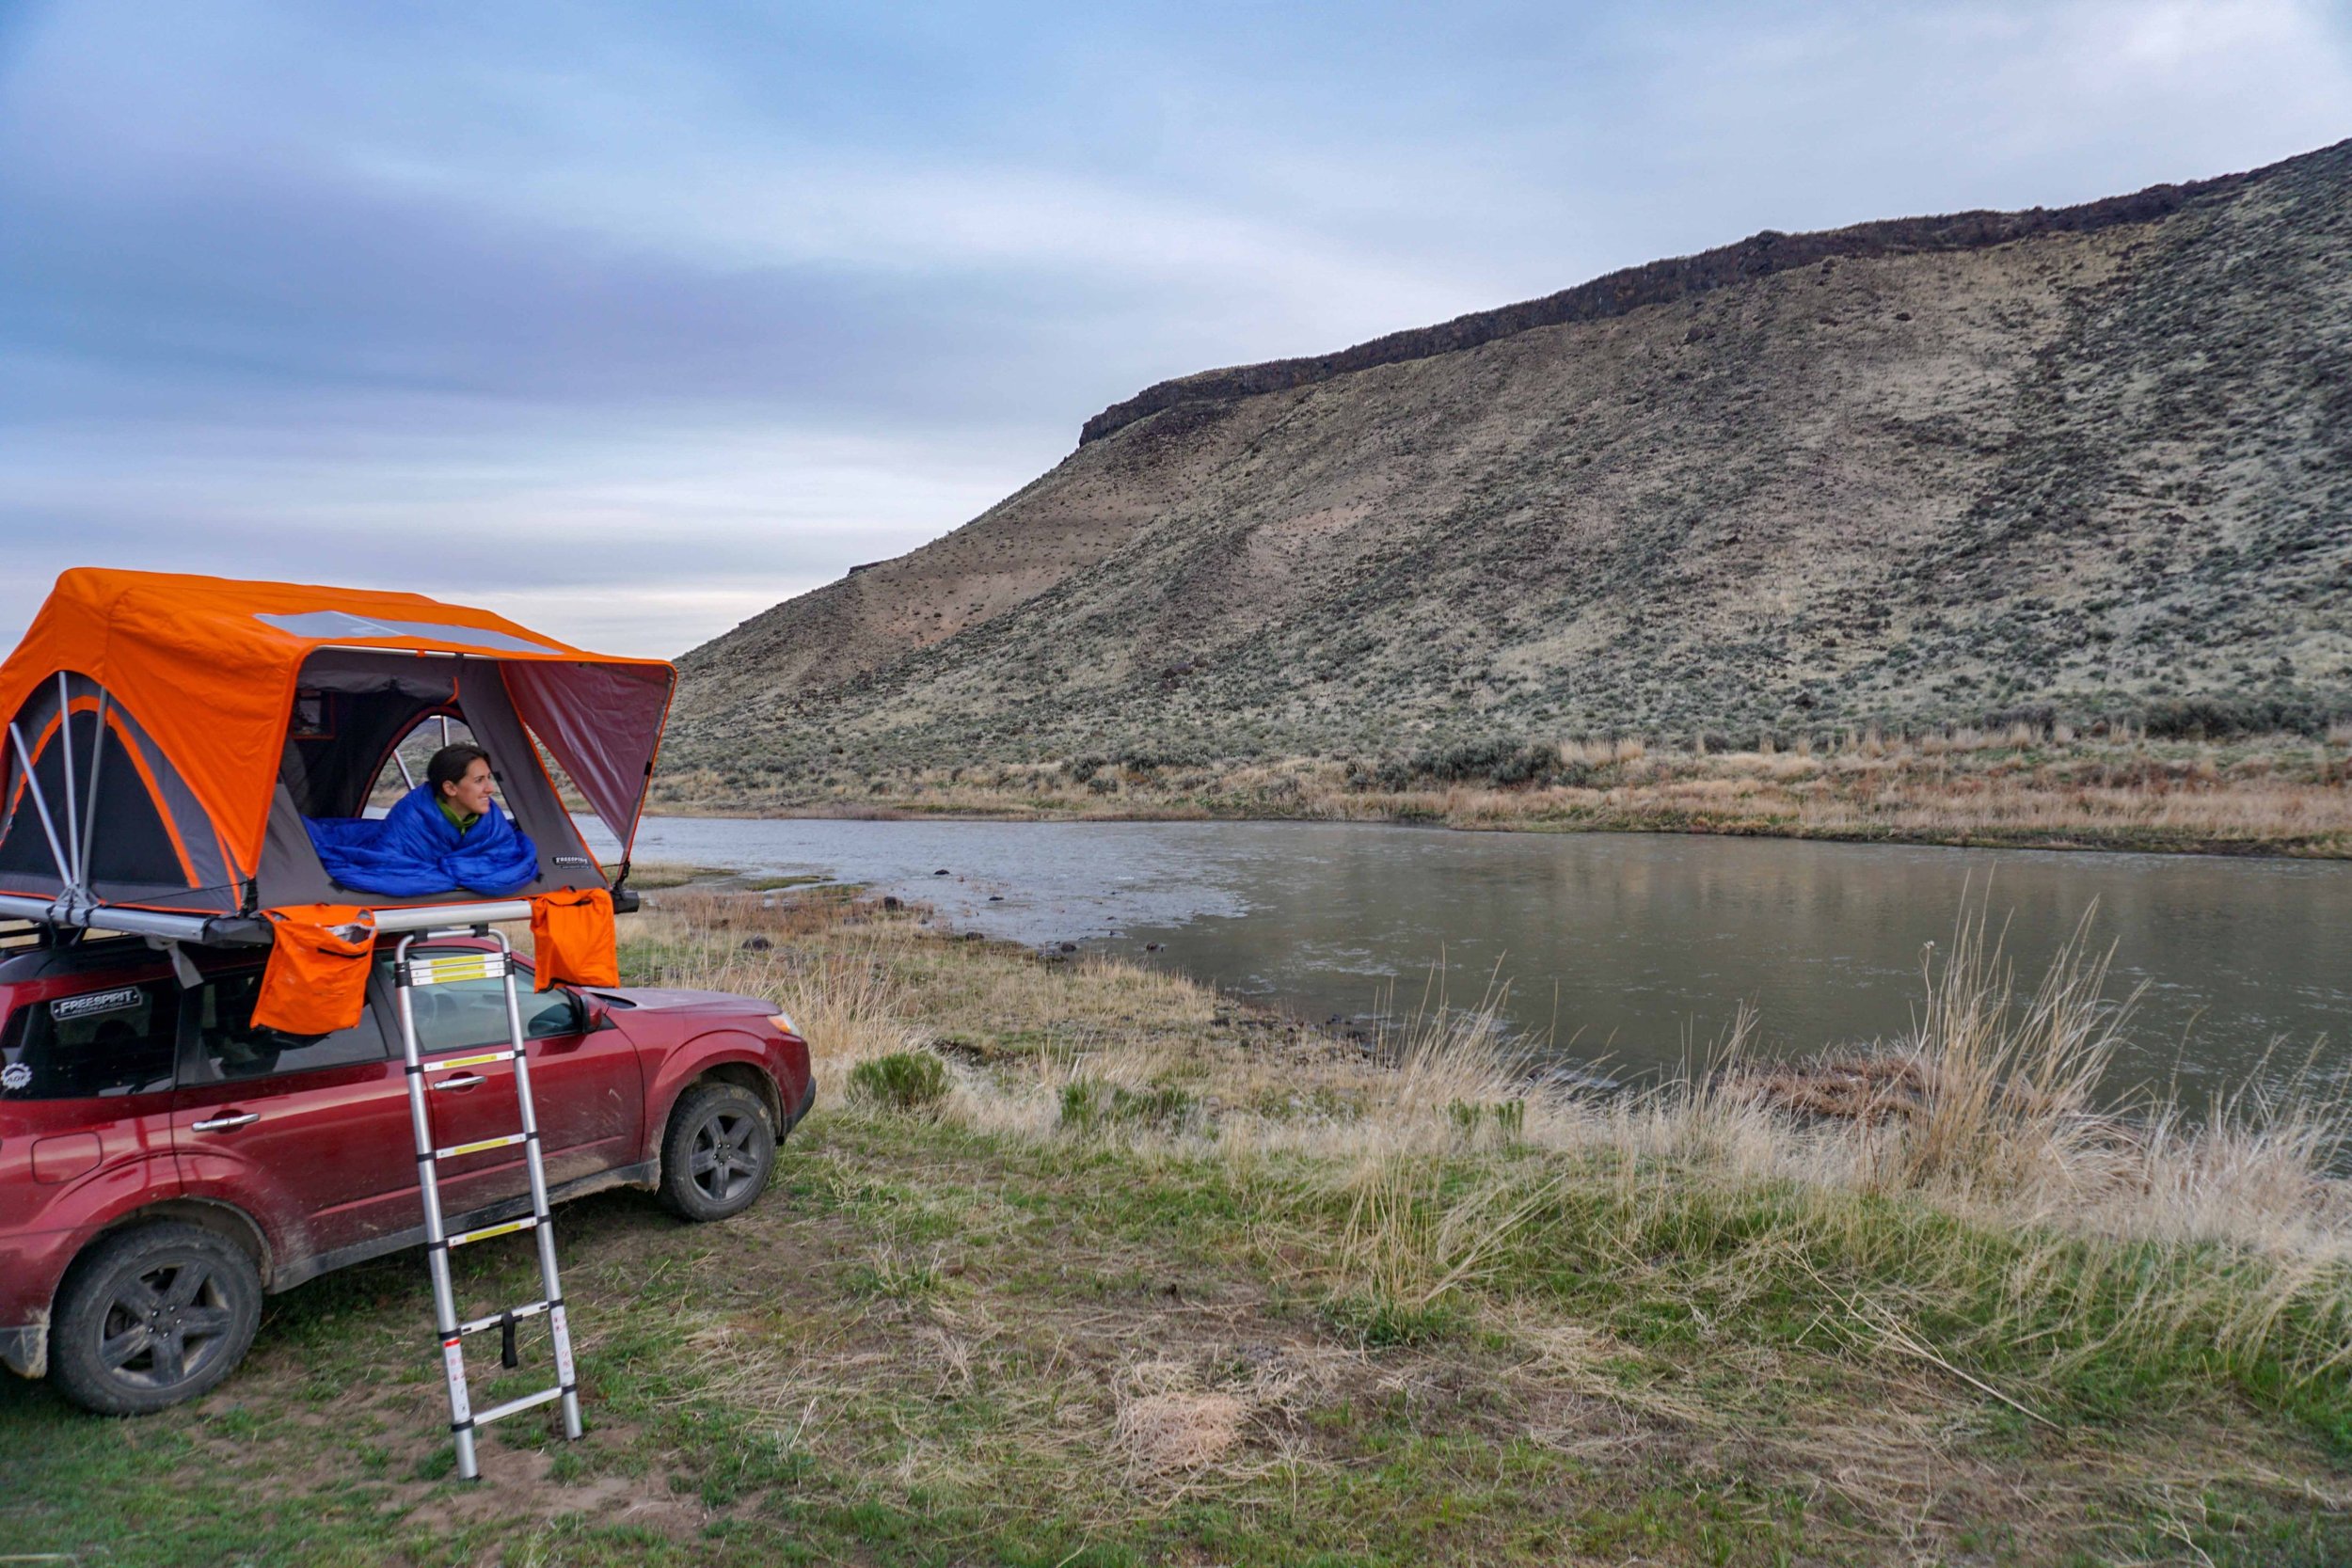 emily-sitting-in-a-tent-on-the-owahee-river-subaru-camper-two-dusty-travelers.jpg